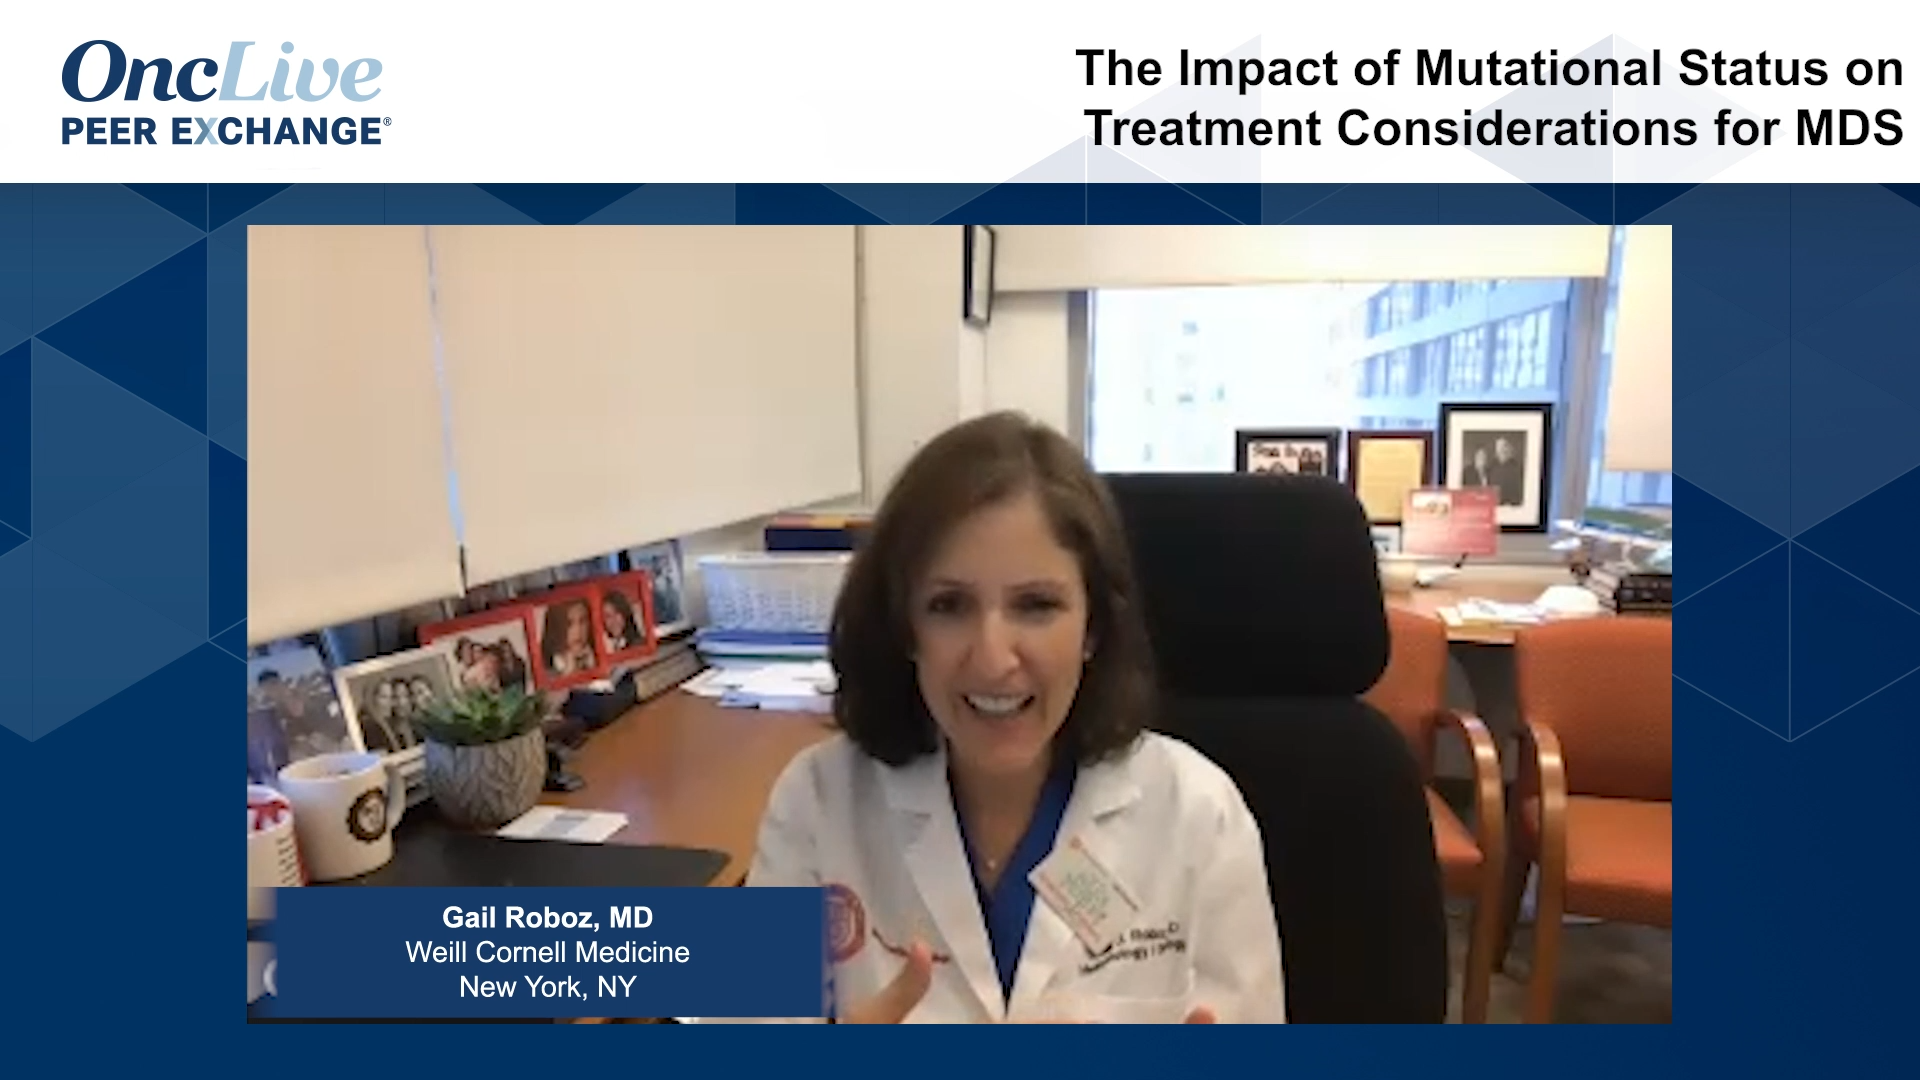 The Impact of Mutational Status on Treatment Considerations for MDS